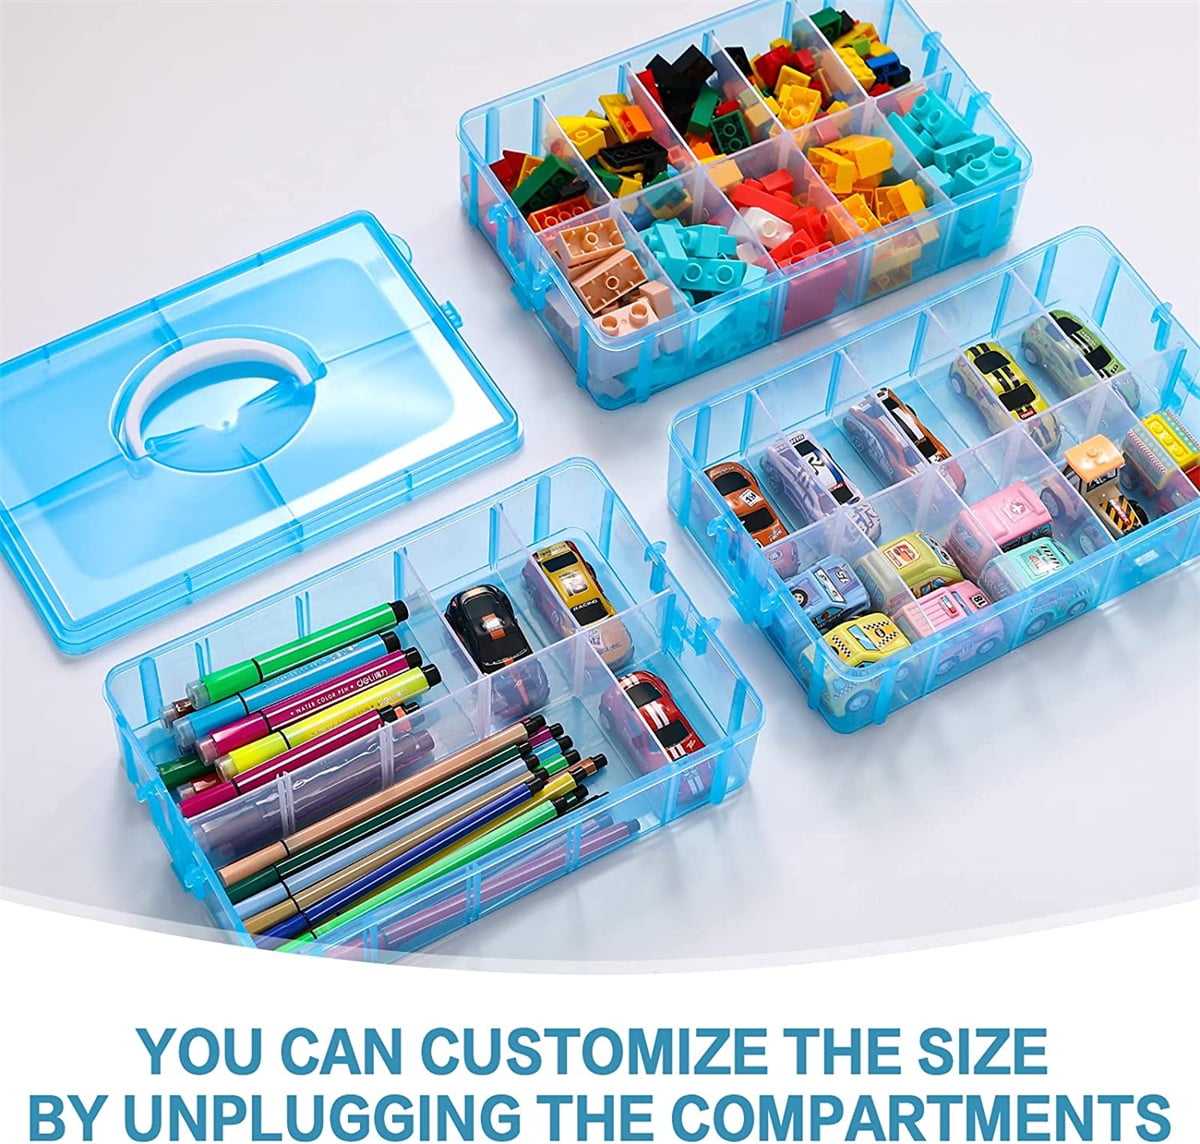 Casewin 3-Tier Stackable Craft Organizers and Storage Box with 30  Compartments,Bead Organizer,Plastic Storage Box for Toys,Dolls, Arts and  Craft, Tape, Rock Collection, Ribbons 